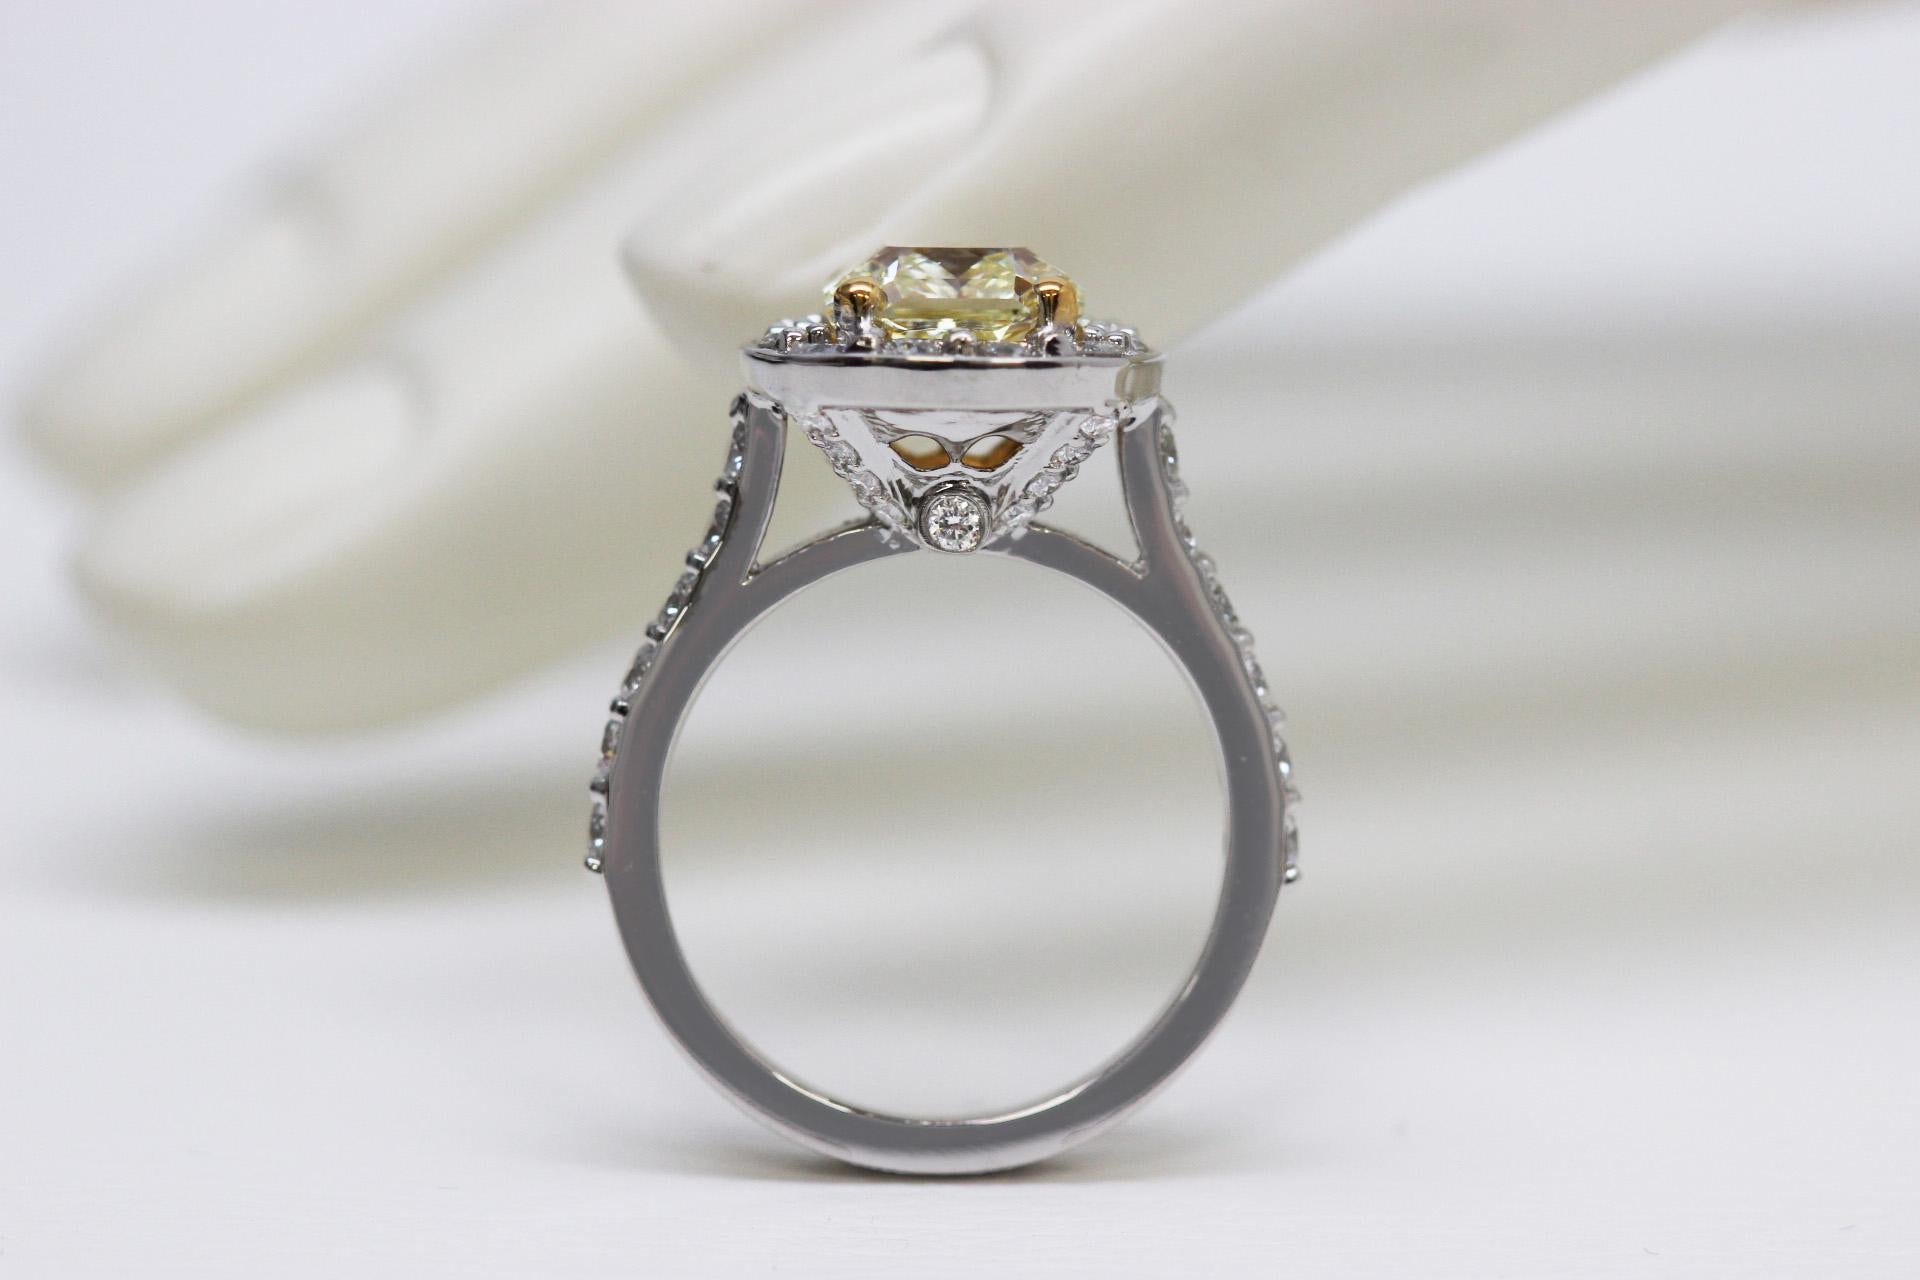 3 Ct Fancy Light Yellow Radiant-Cut Diamond Engagement Ring GIA SCARSELLI VVS1 In New Condition For Sale In New York, NY